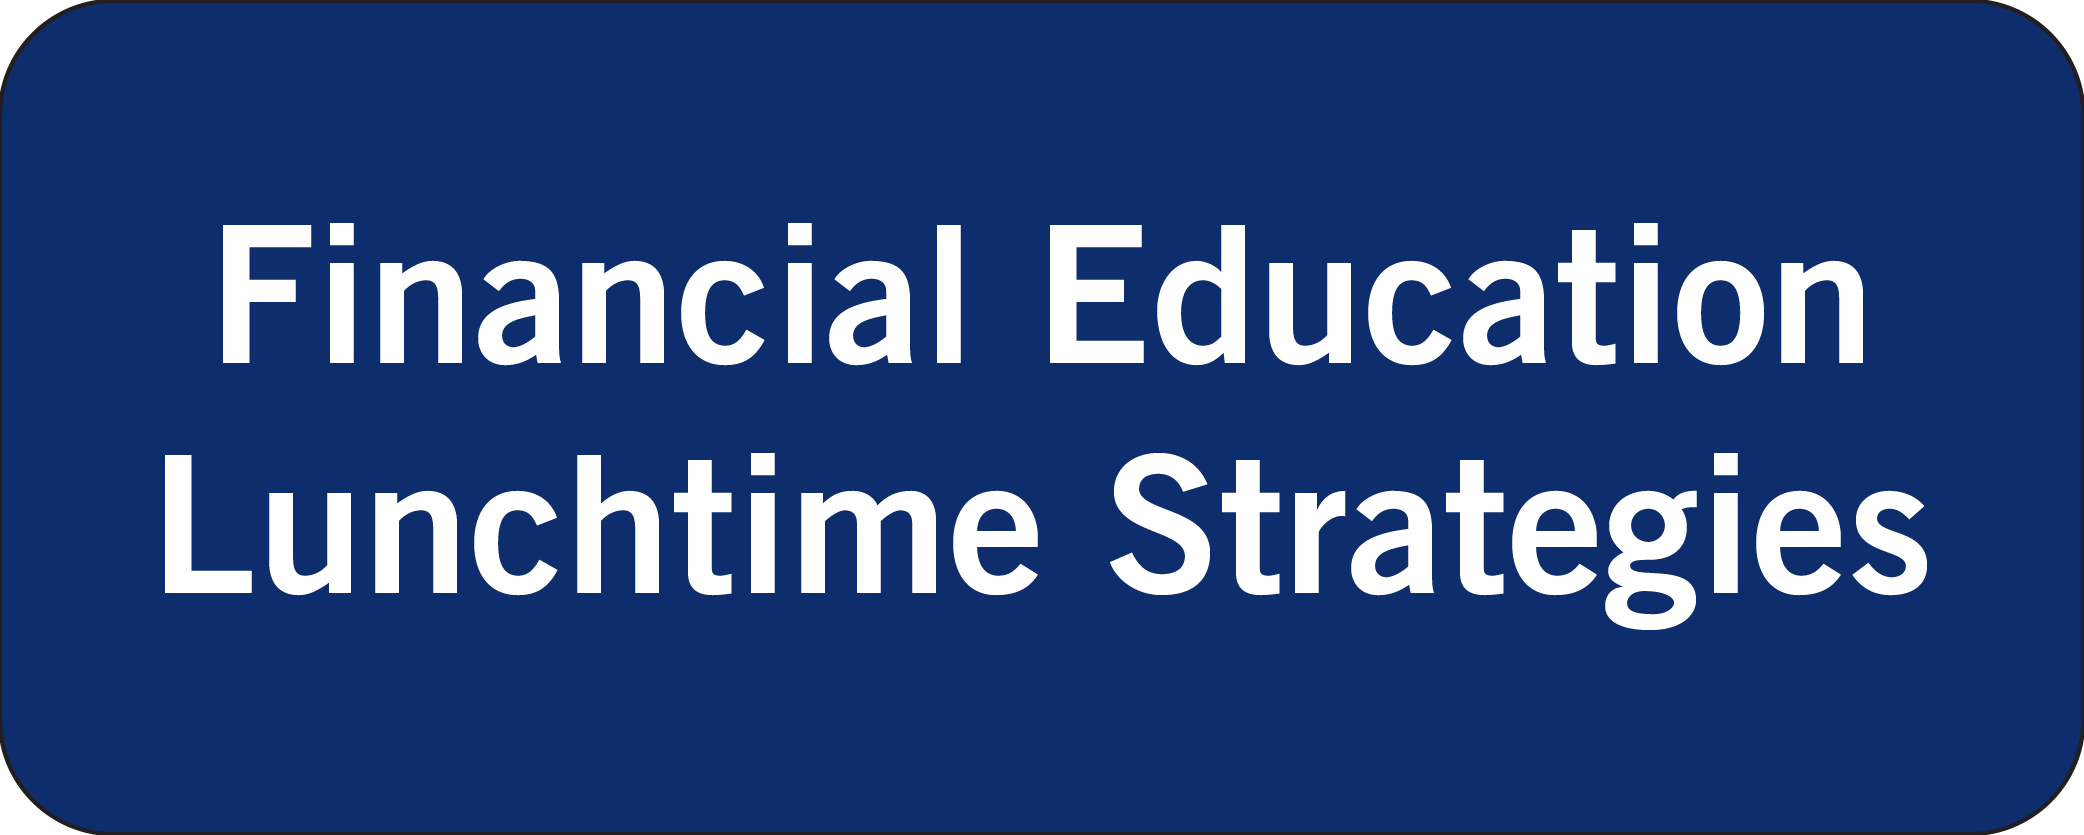 Financial education lunchtime strategies